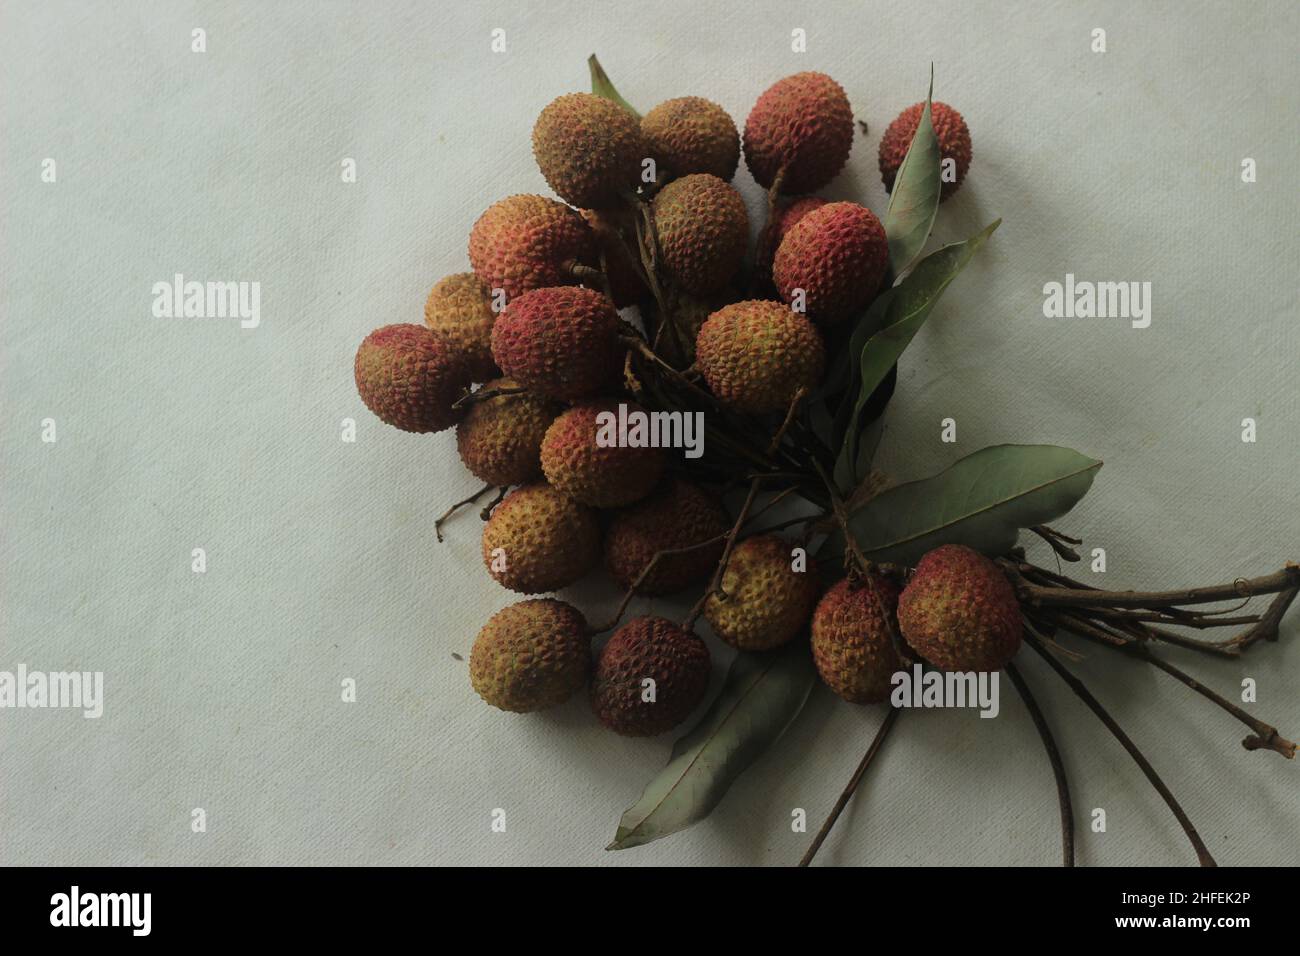 Lychee fruits shot on white background. Litchi chinensis also spelled litchi or lichi, is an evergreen tree of the soapberry or Sapindaceae family, gr Stock Photo